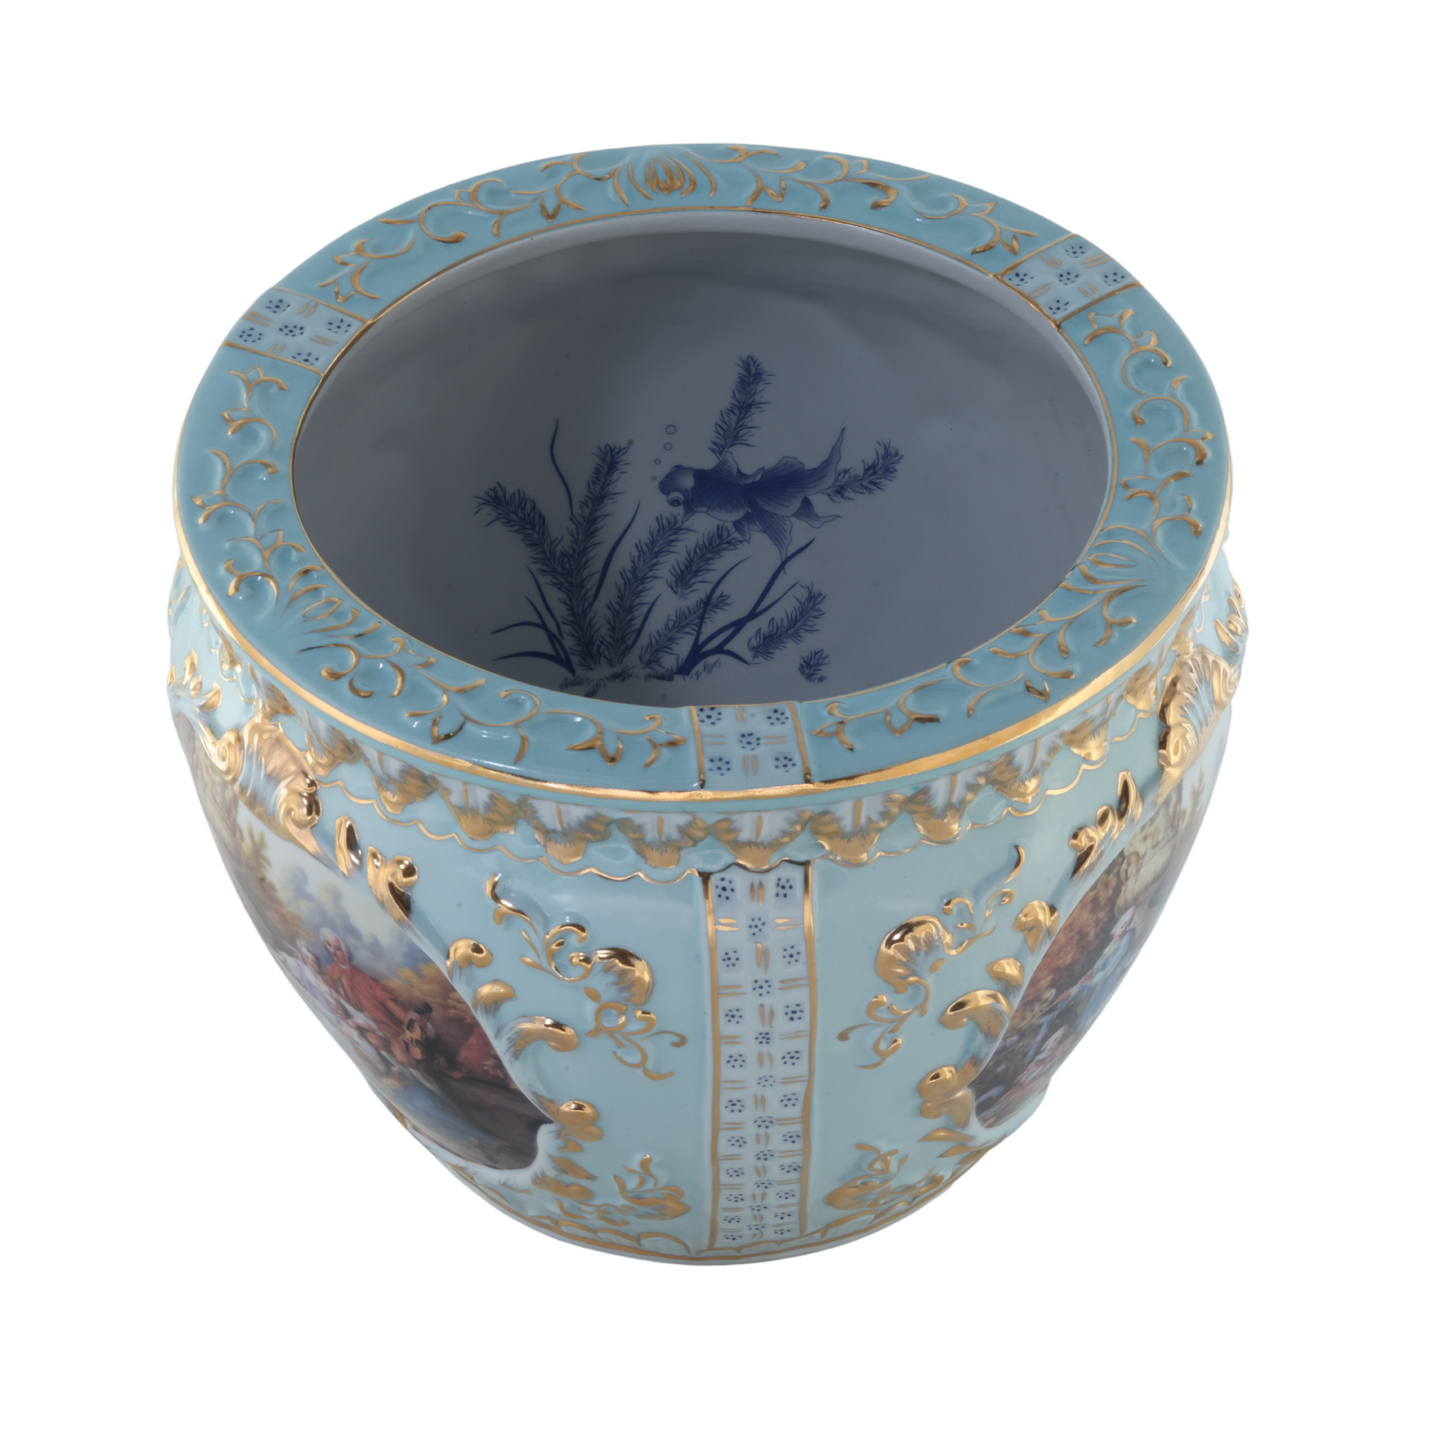 Rococo Planter Pot in Teal